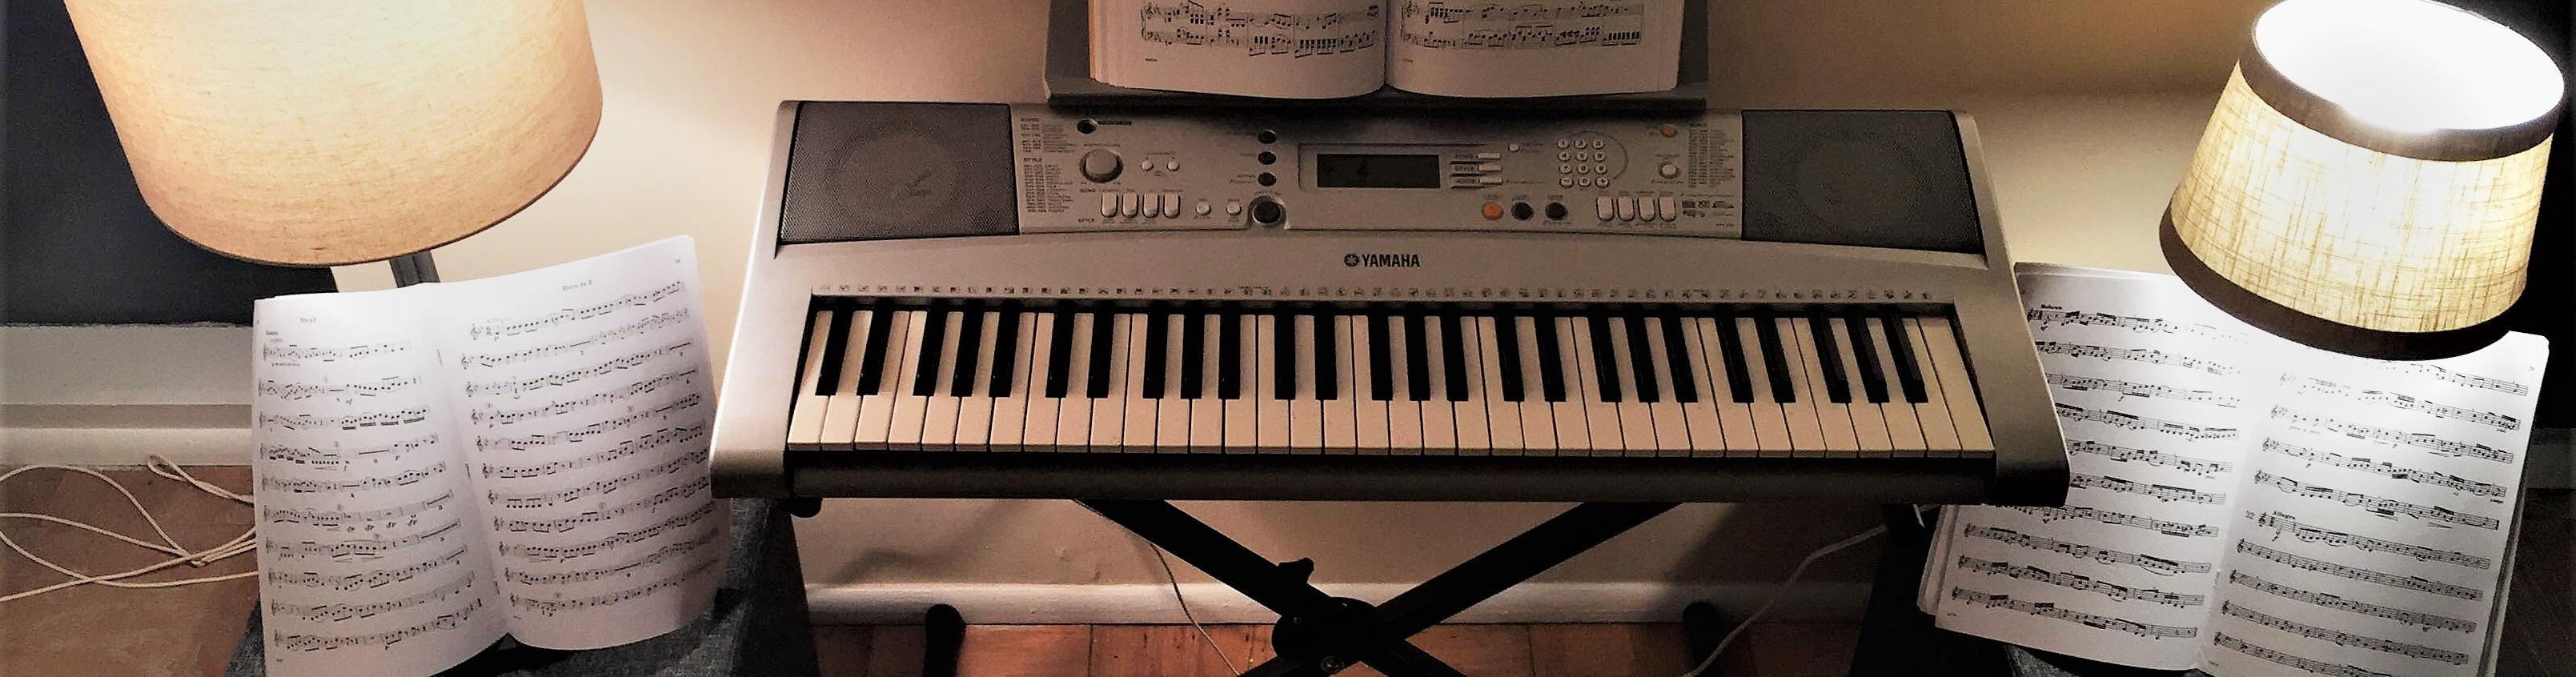 A keyboard with a music book open is flanked by two lamps and two additional music books open.